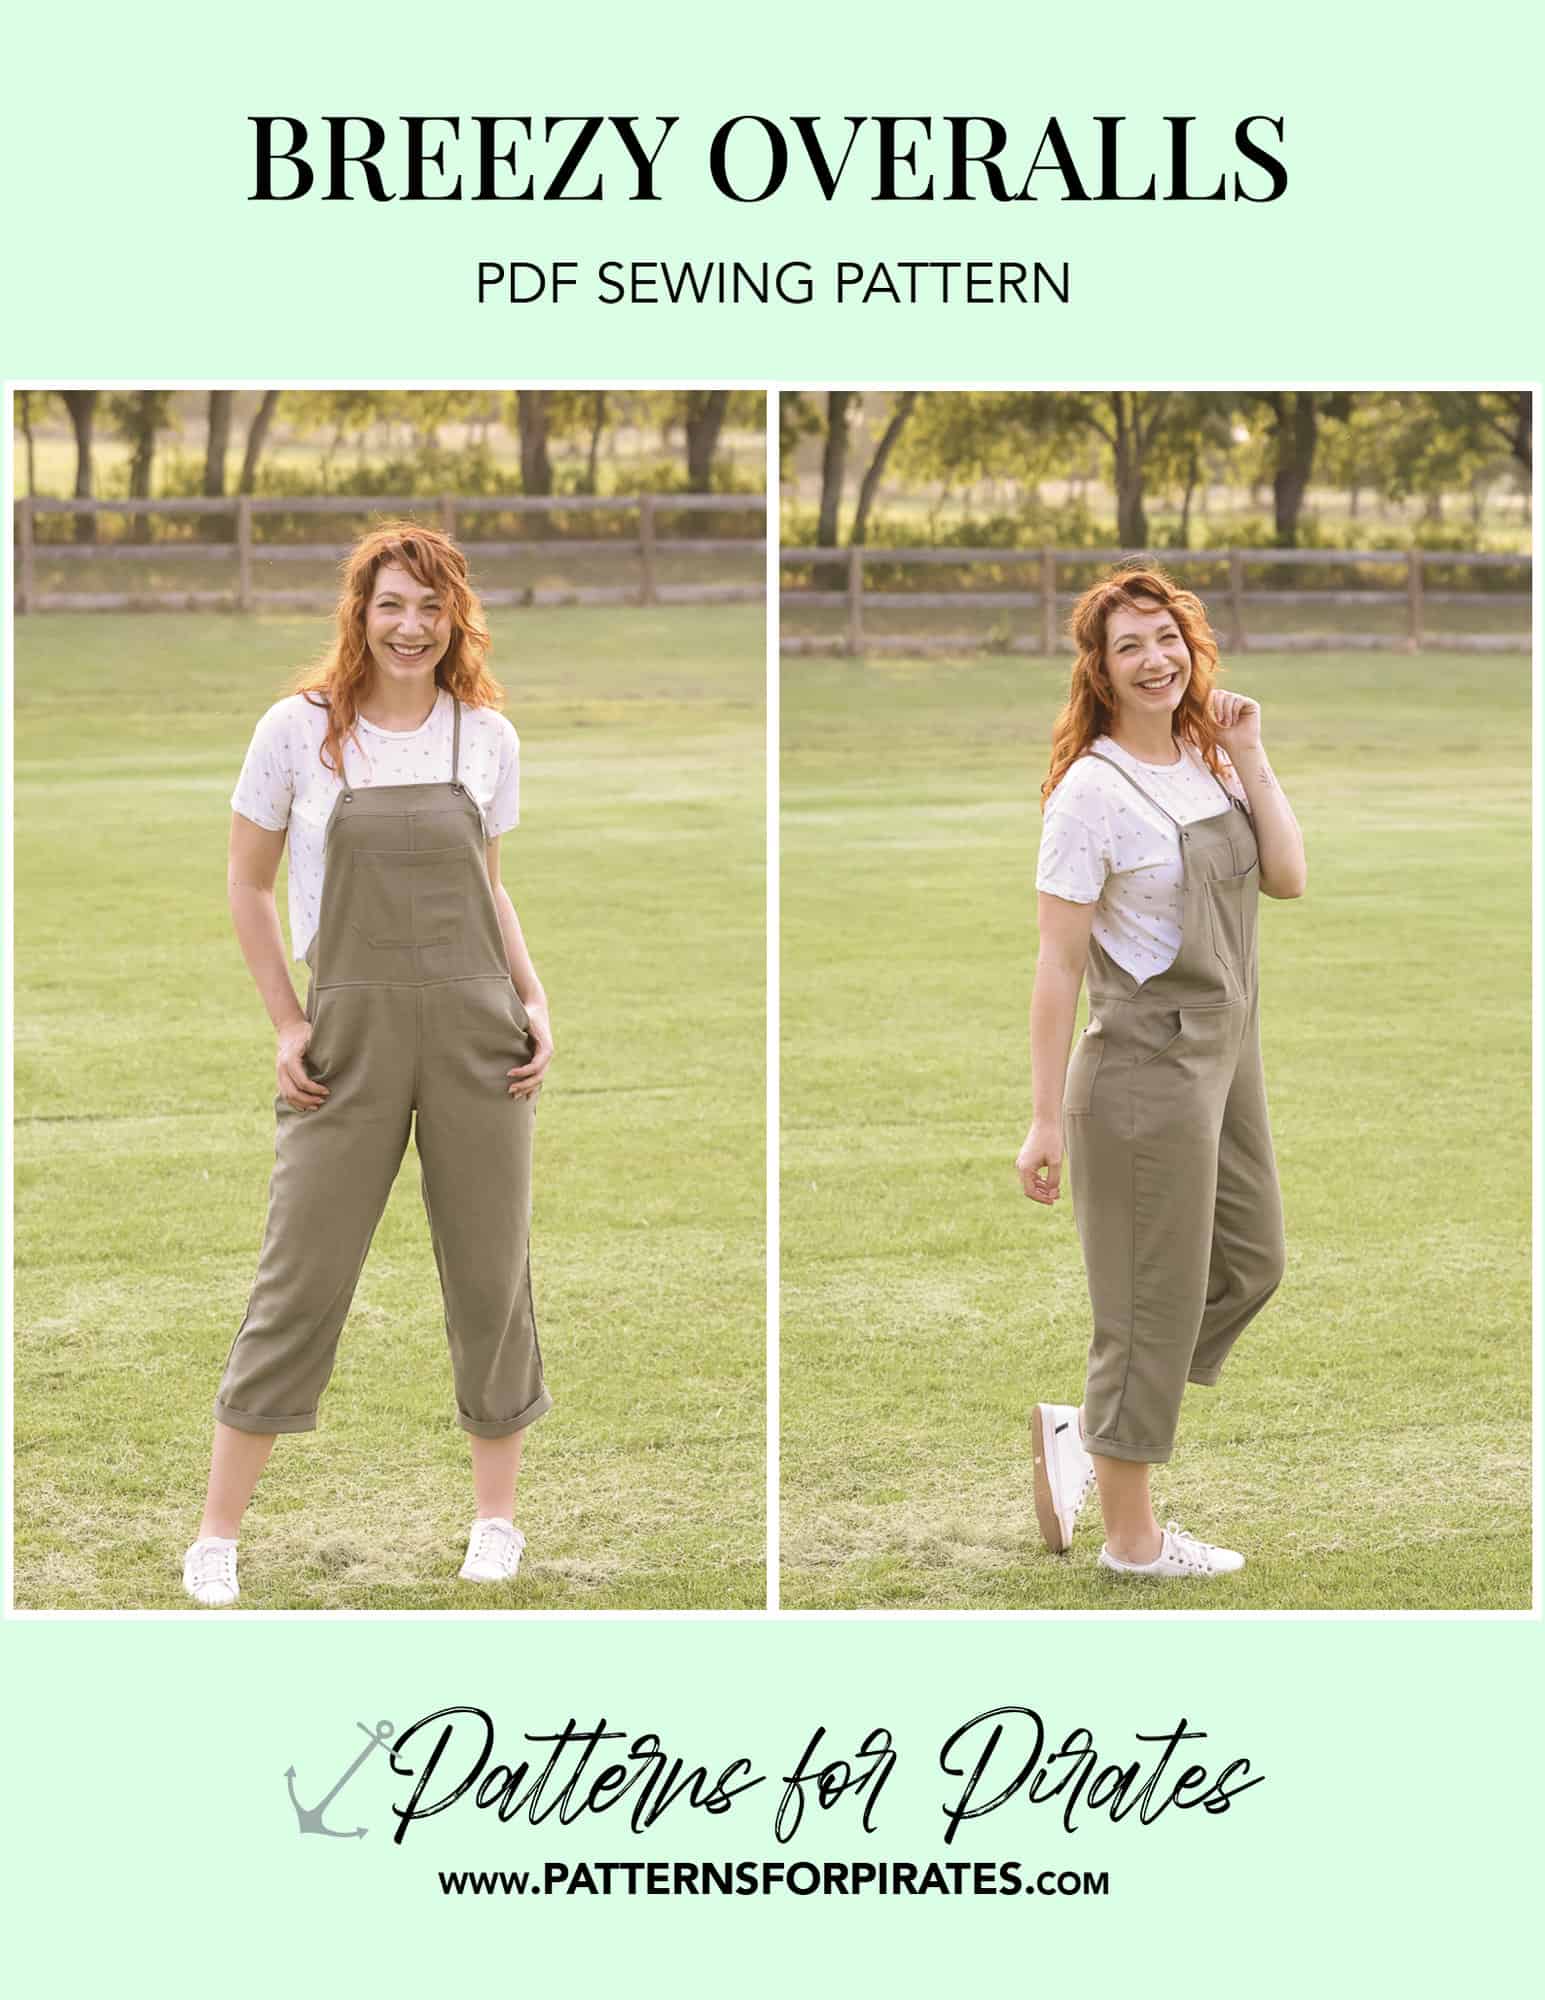 Breezy Overalls - Patterns for Pirates